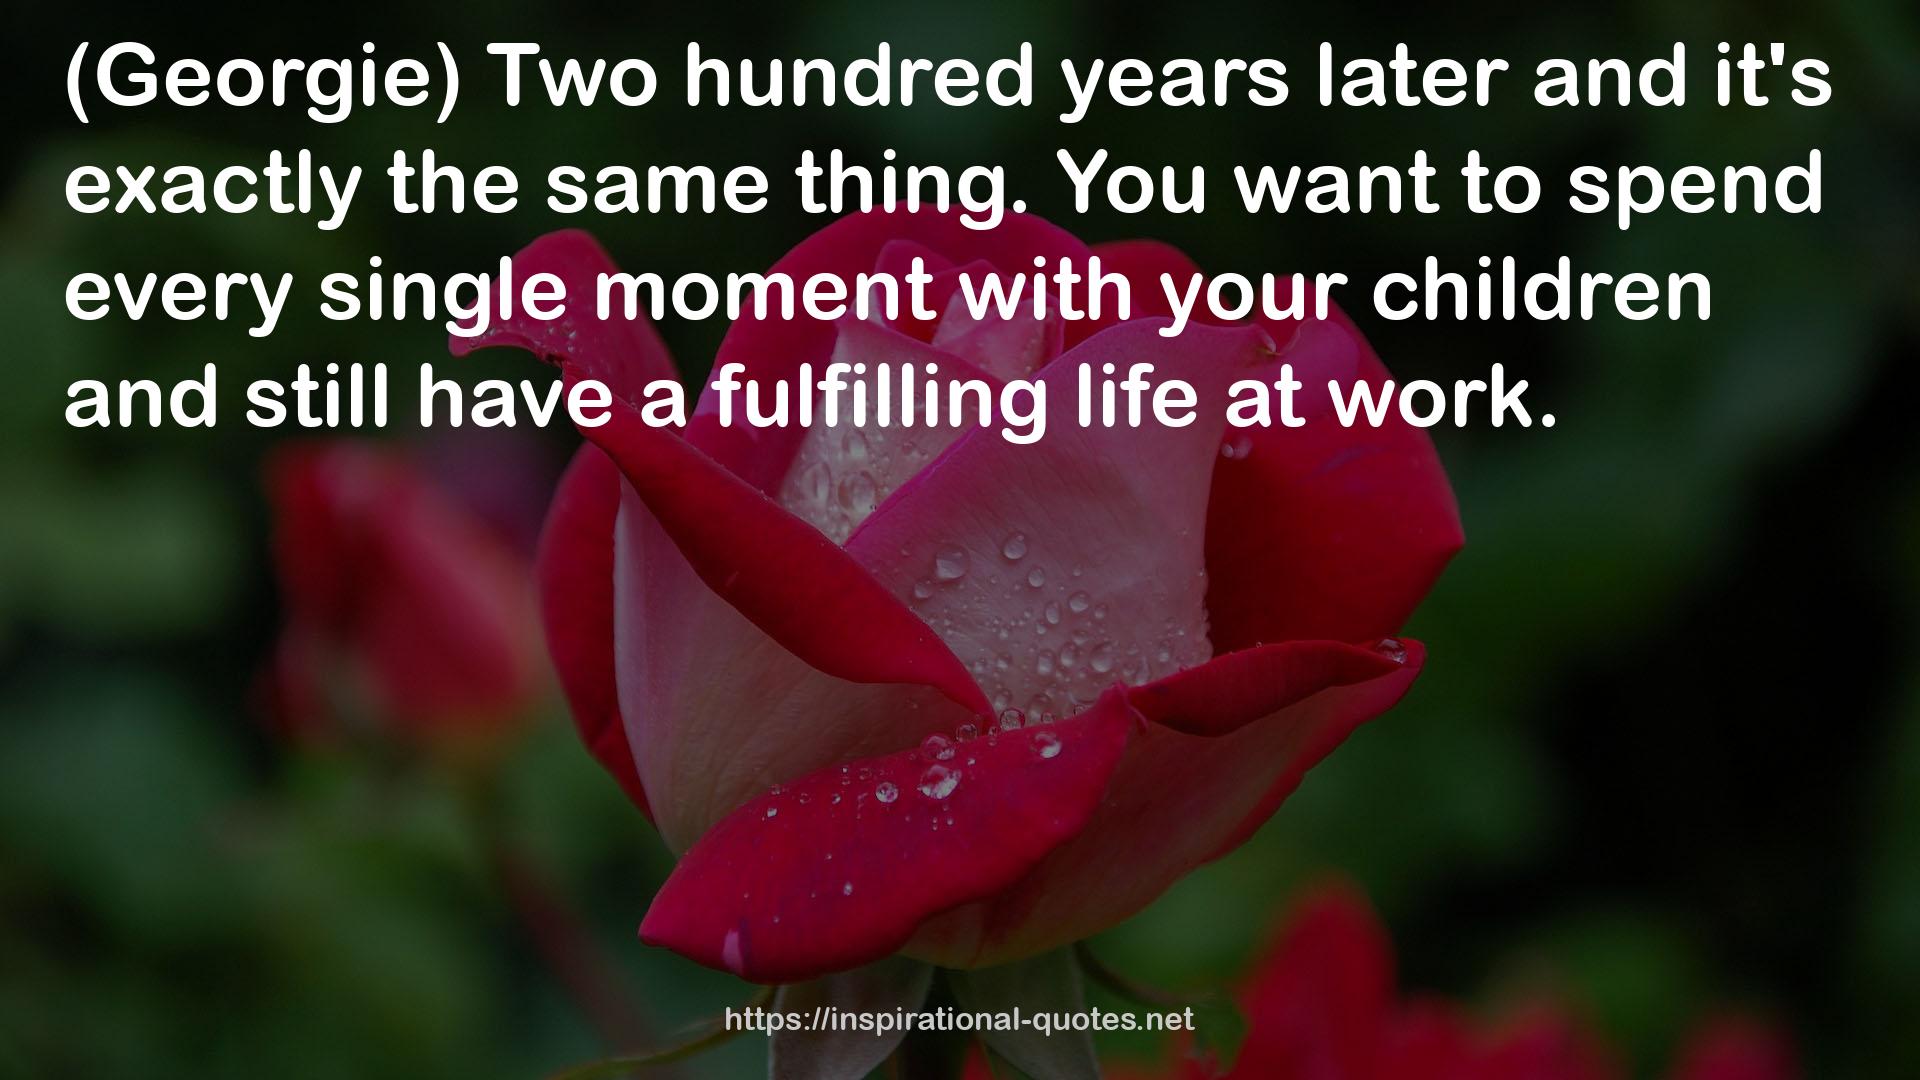 a fulfilling life  QUOTES